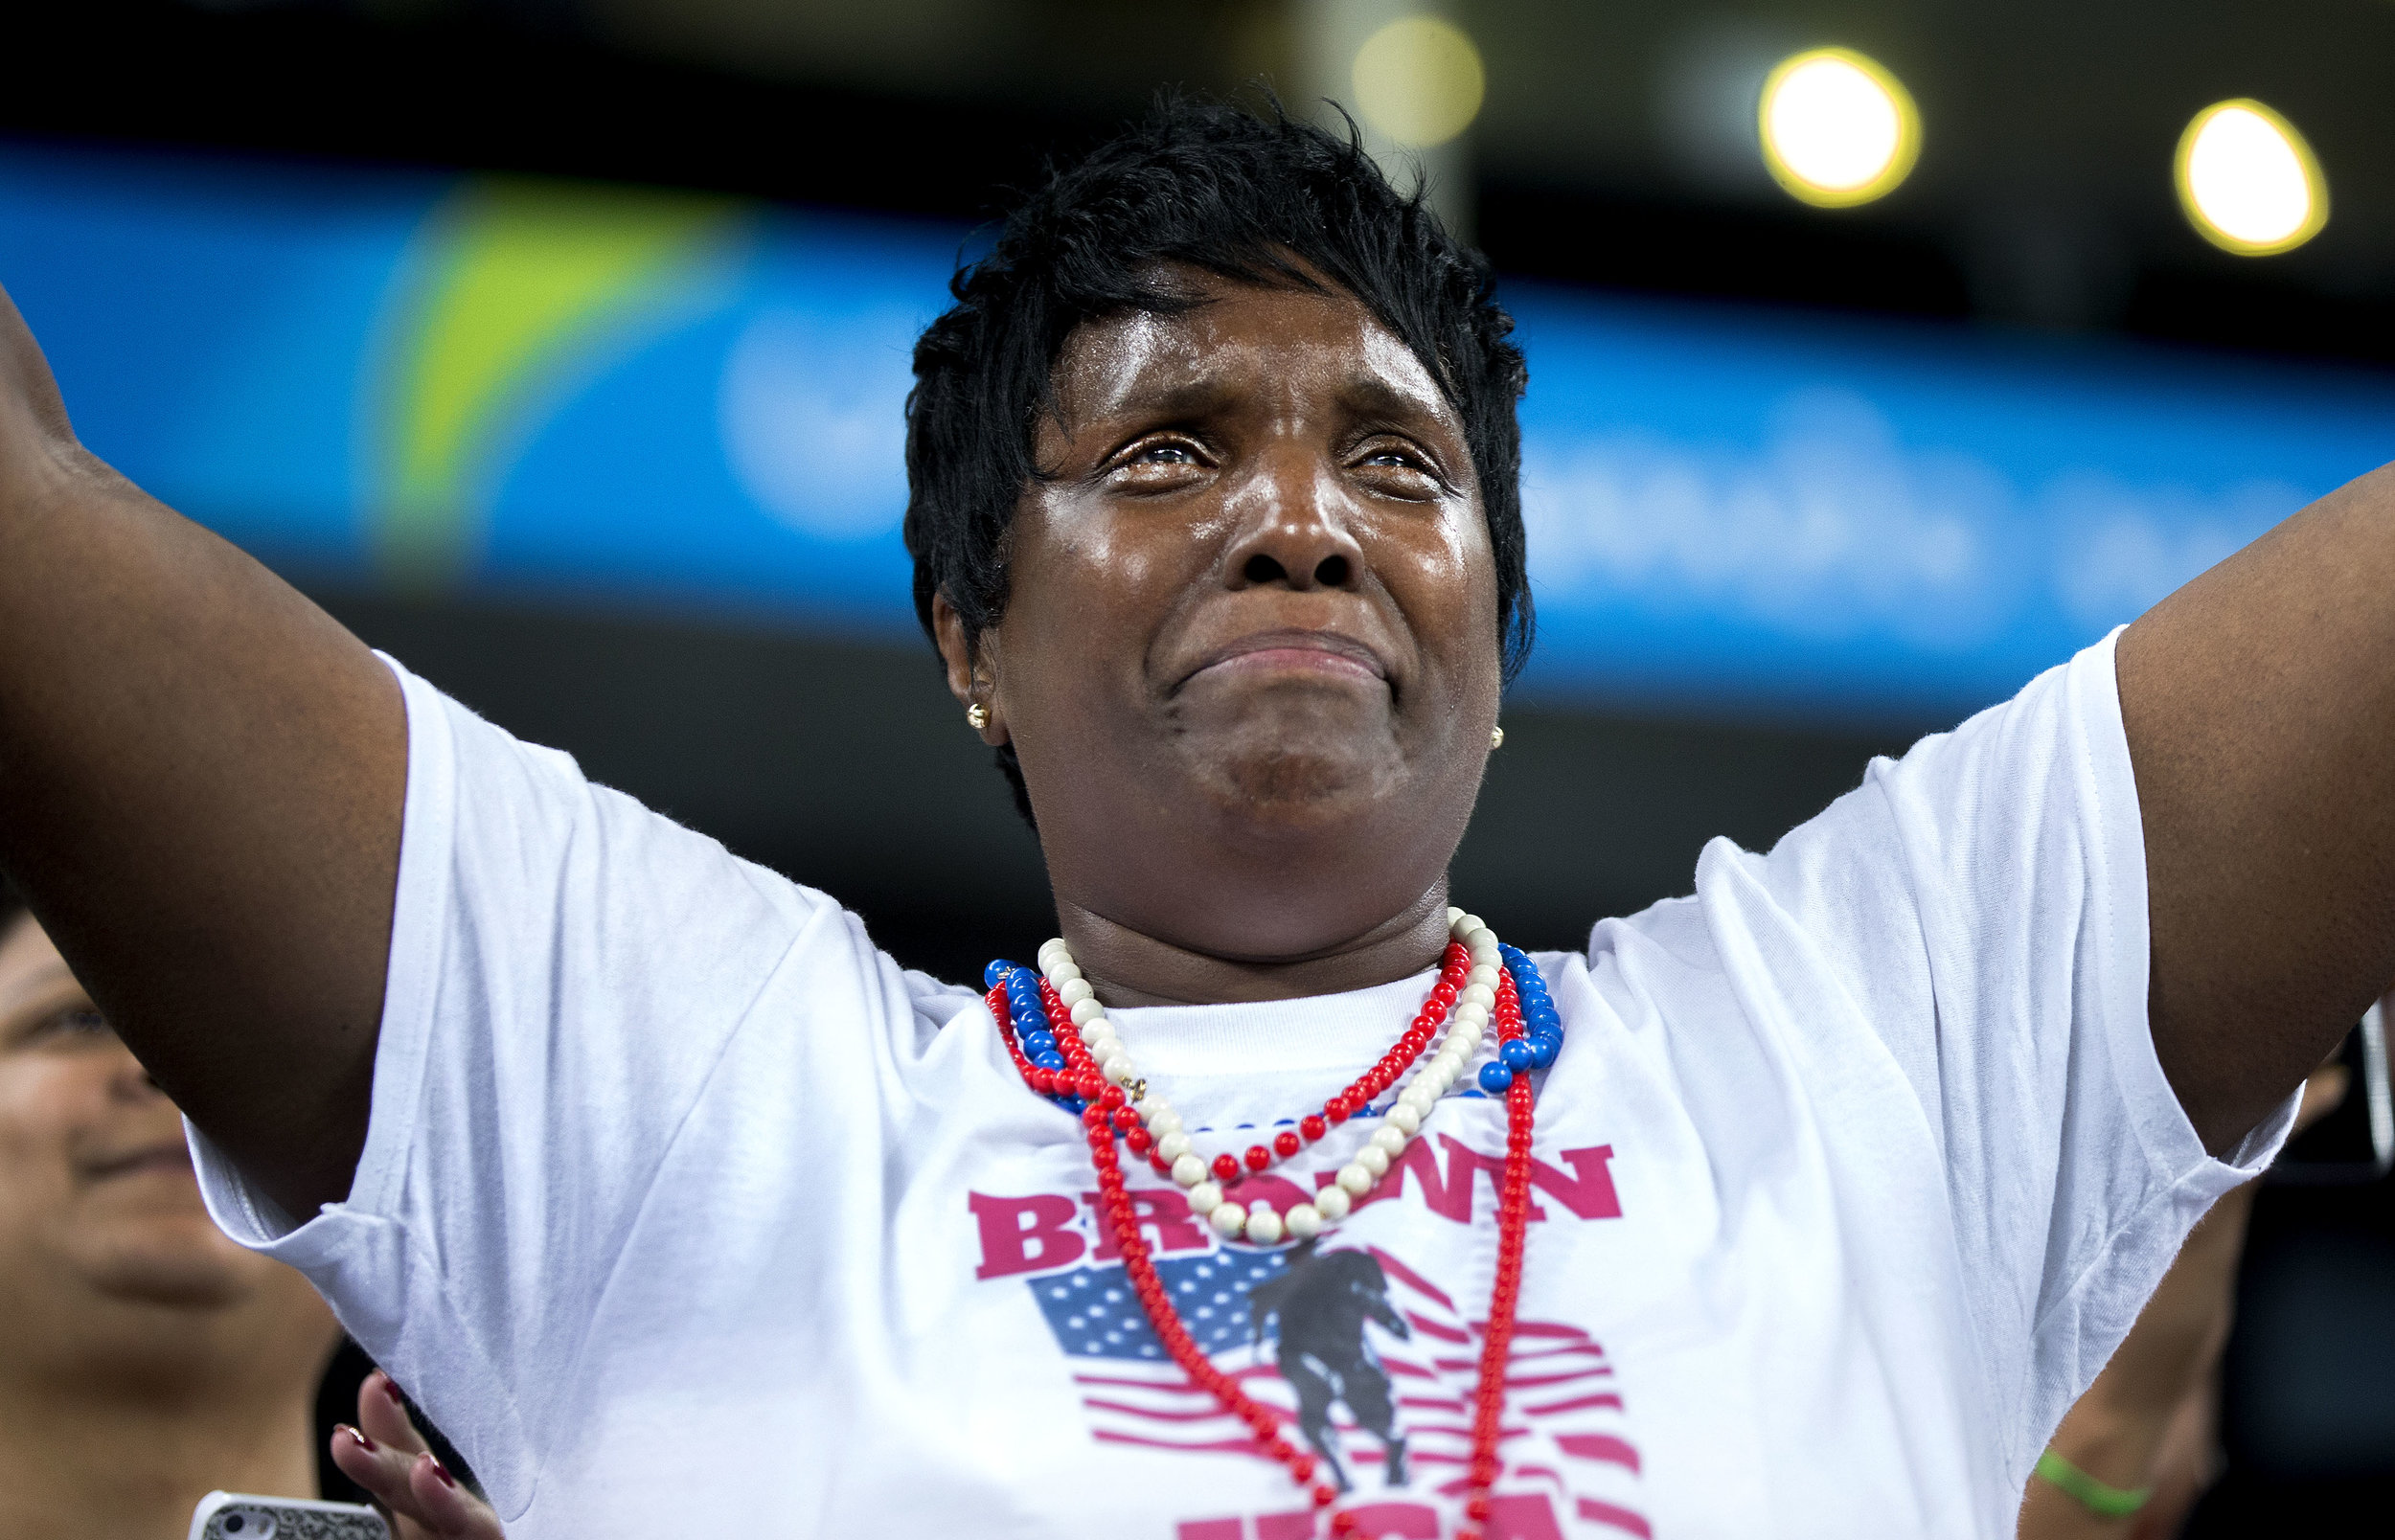  Francine Brown, the mother of Paralympic sprinter David Brown, bursts into tears of joy after her son ran a Paralymic record time of 10.99 seconds to win gold in the 100 meter dash at the 2016 Paralympic Games at Olympic Stadium in Rio de Janeiro, o